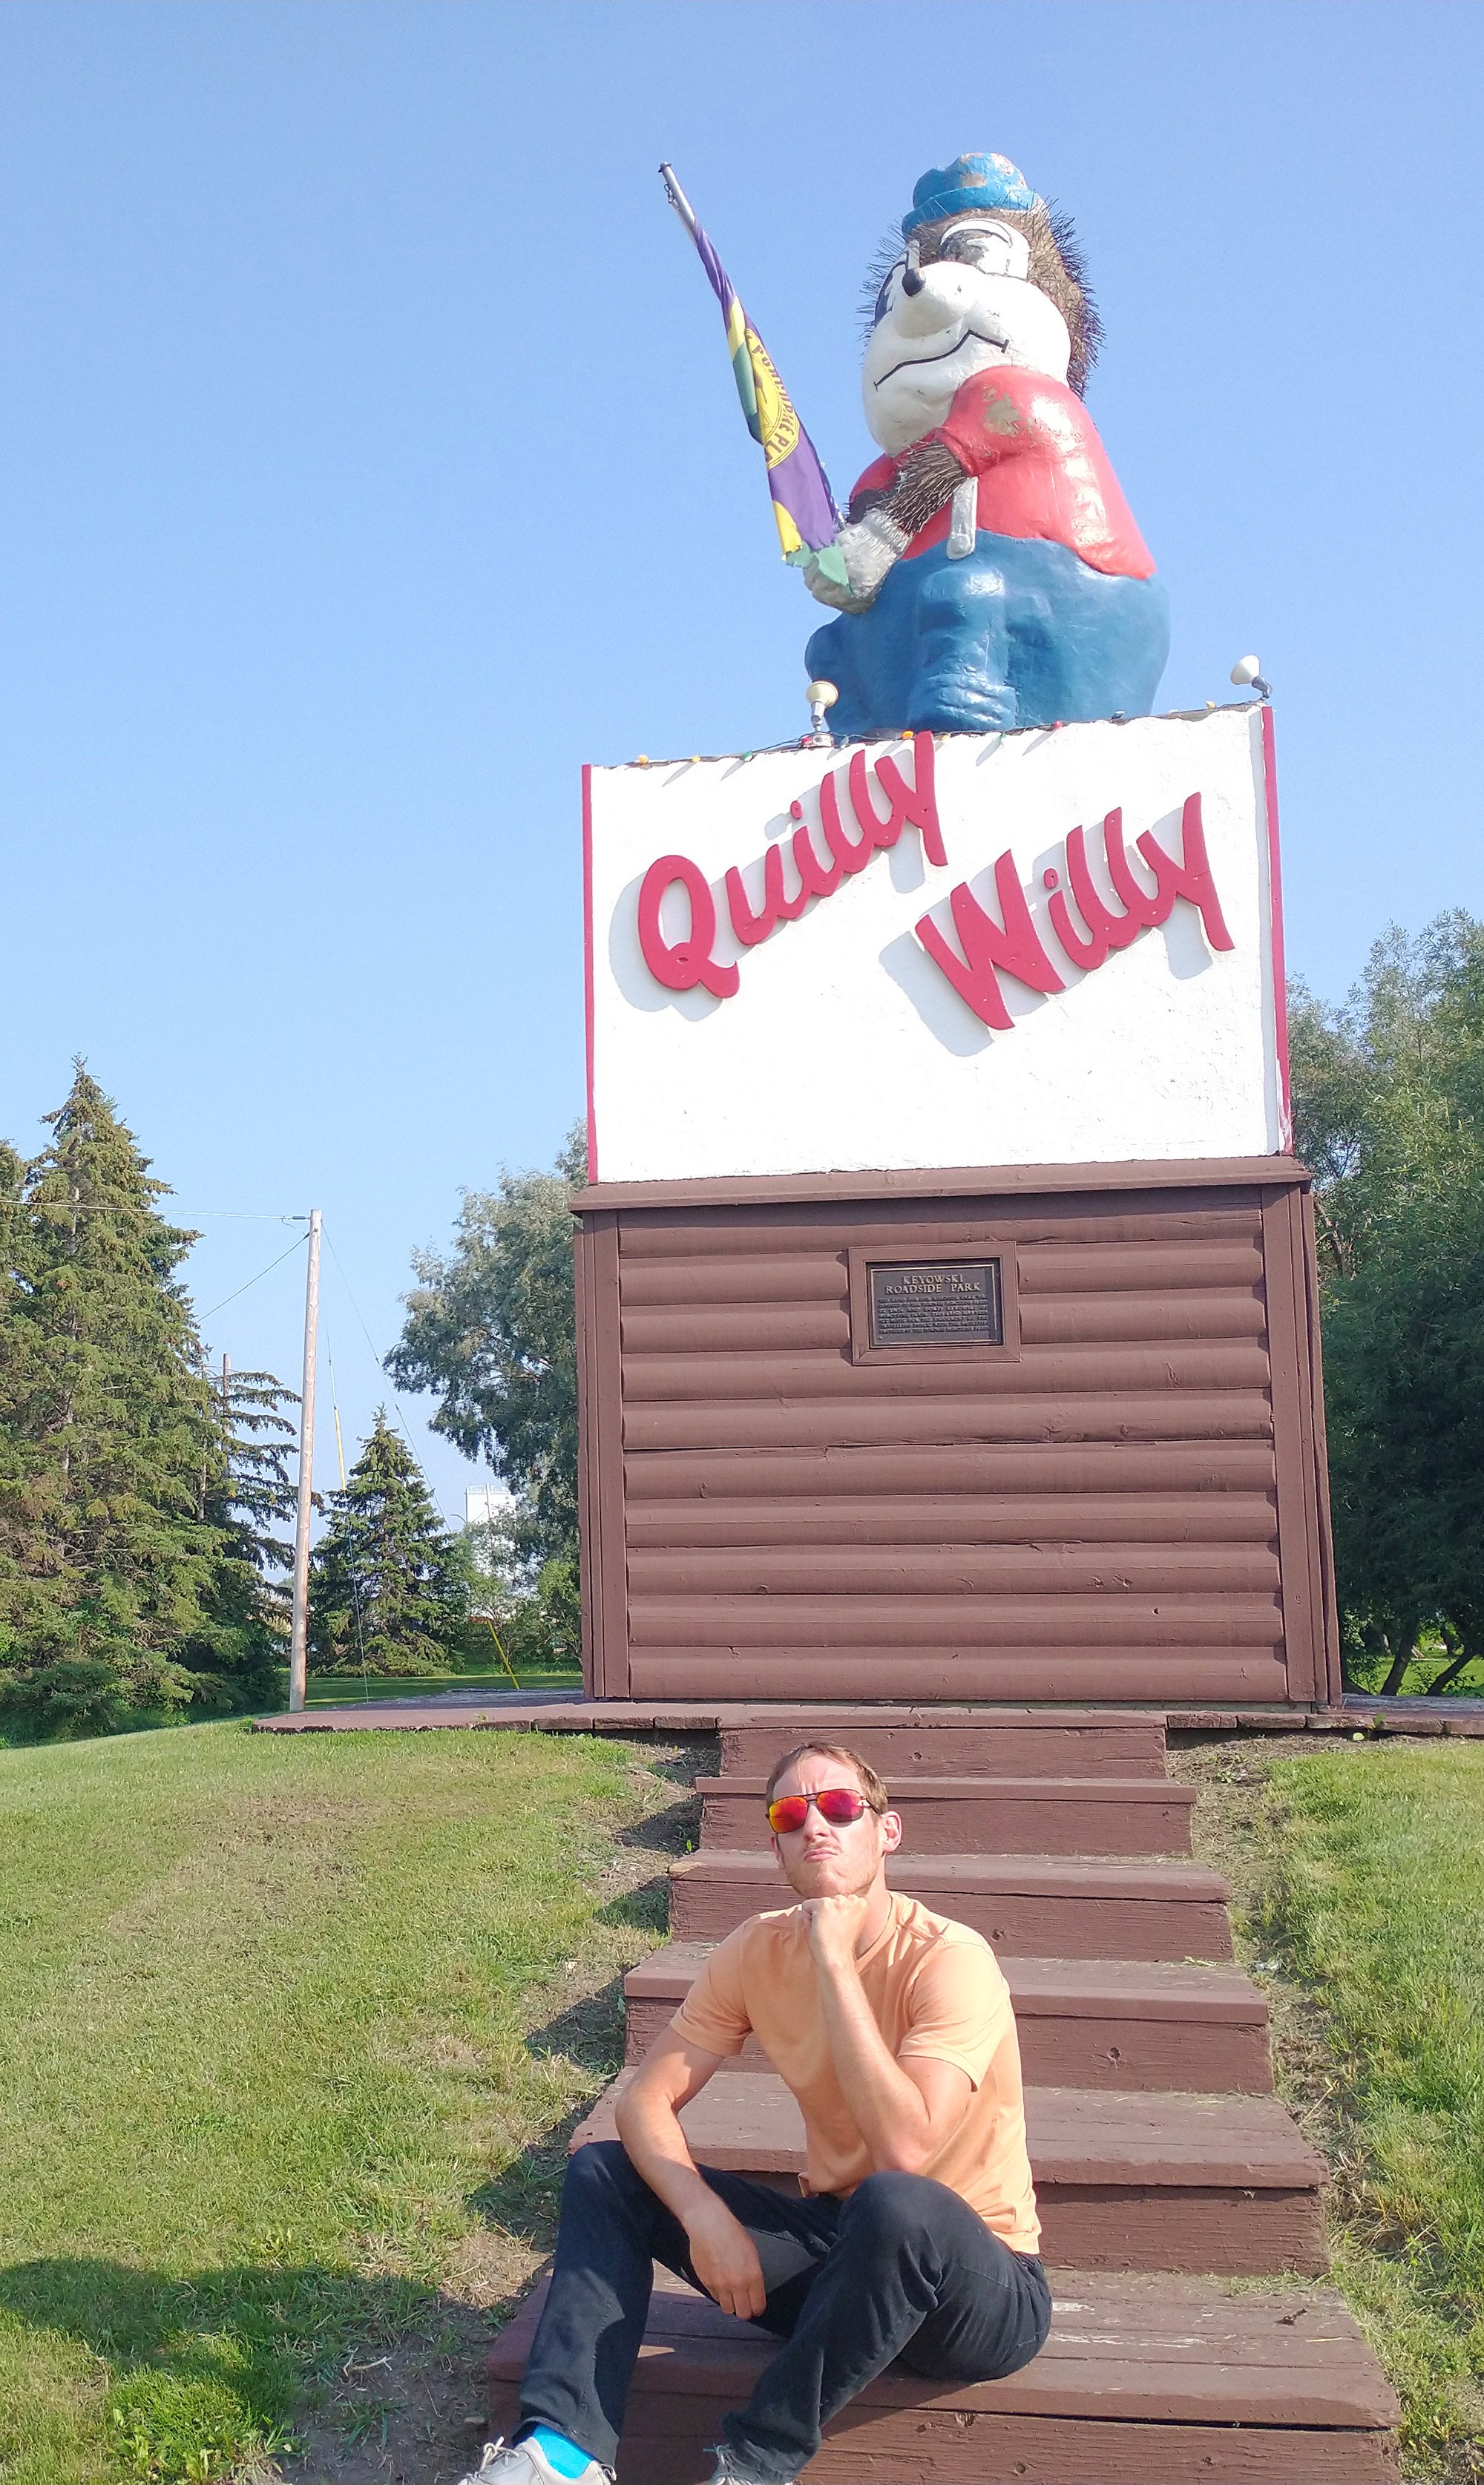 Quilly Willy, mascot of a town called Porcupine Tree. You really gotta want to see him.